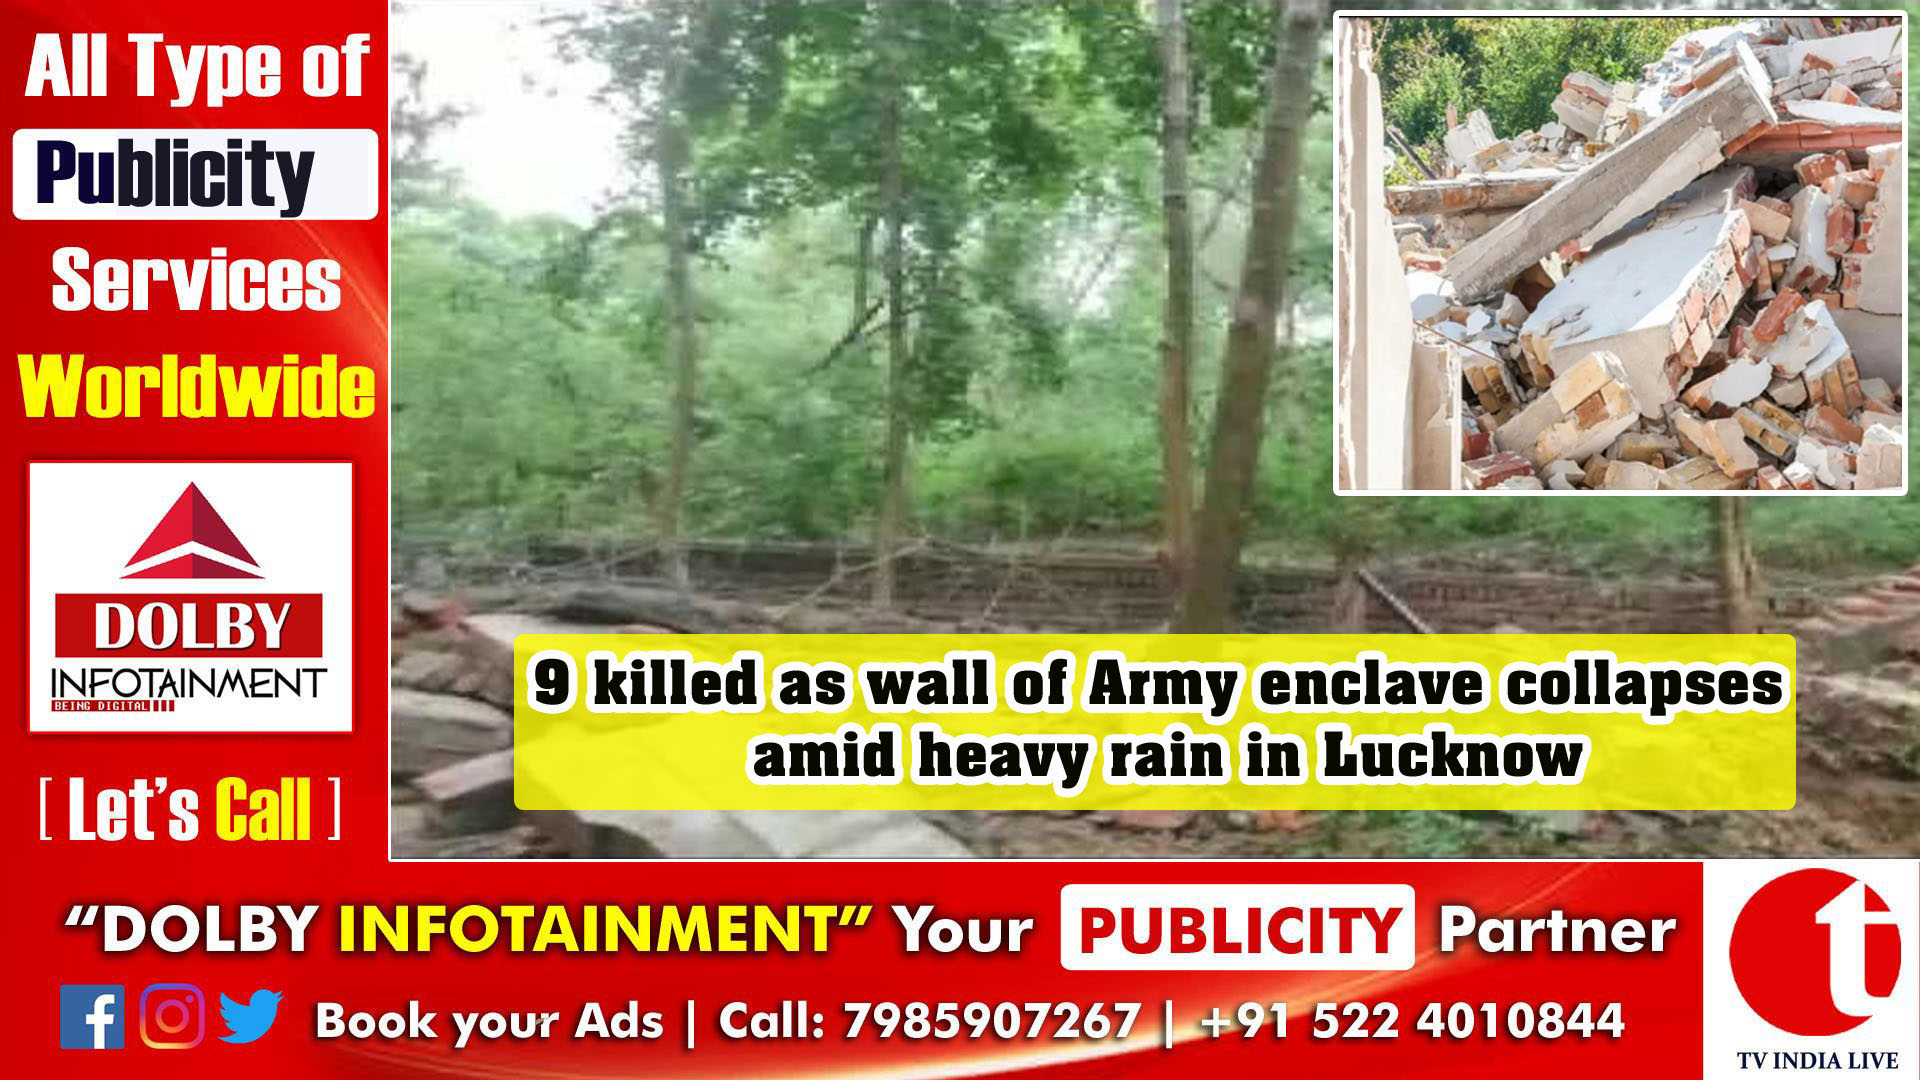 9 killed as wall of Army enclave collapses amid heavy rain in Lucknow